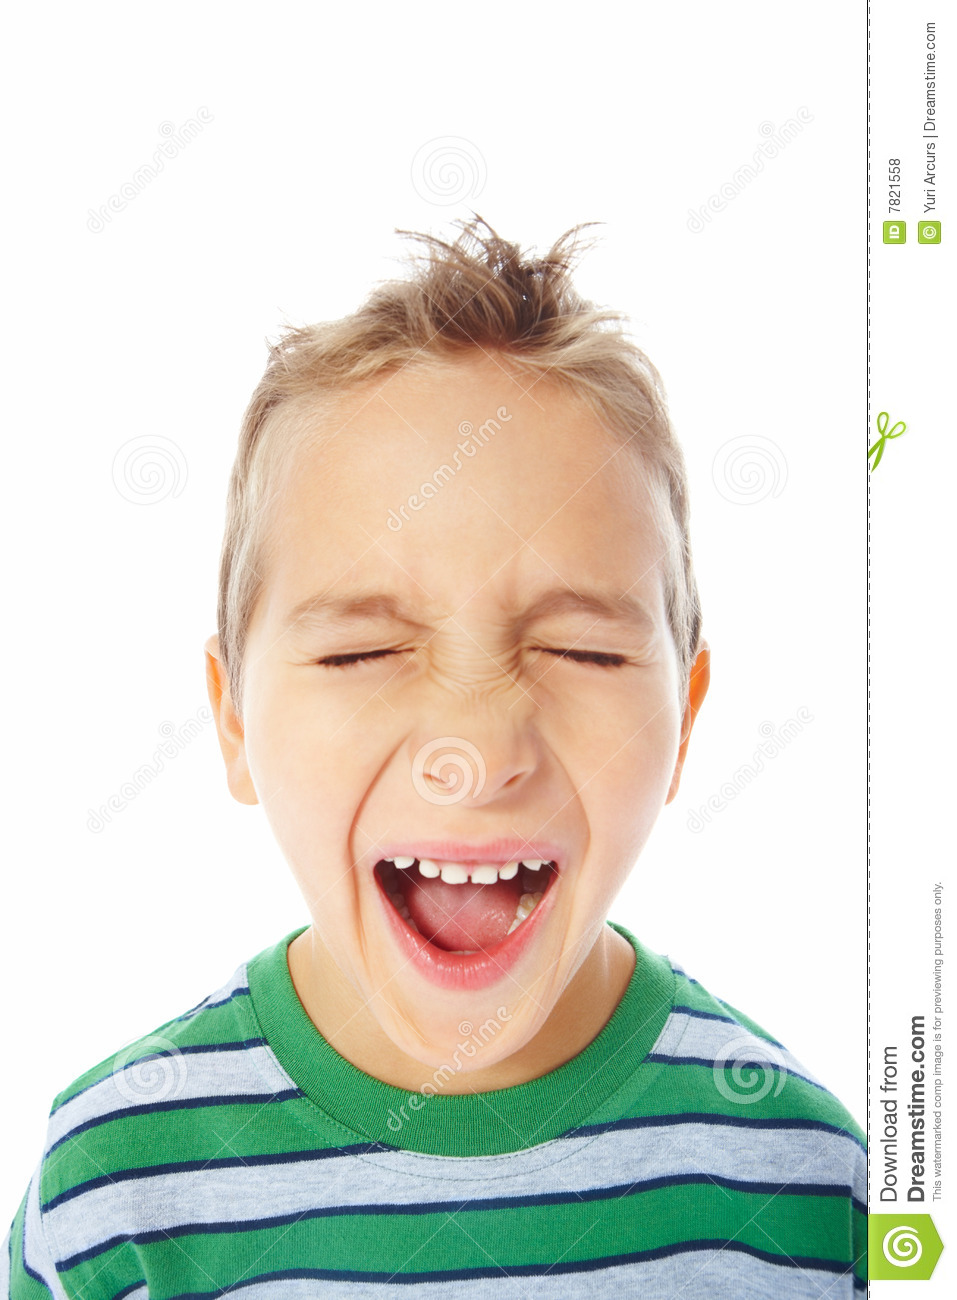 Photos  Small Boy With Eyes Closed And Mouth Open  Image  7821558